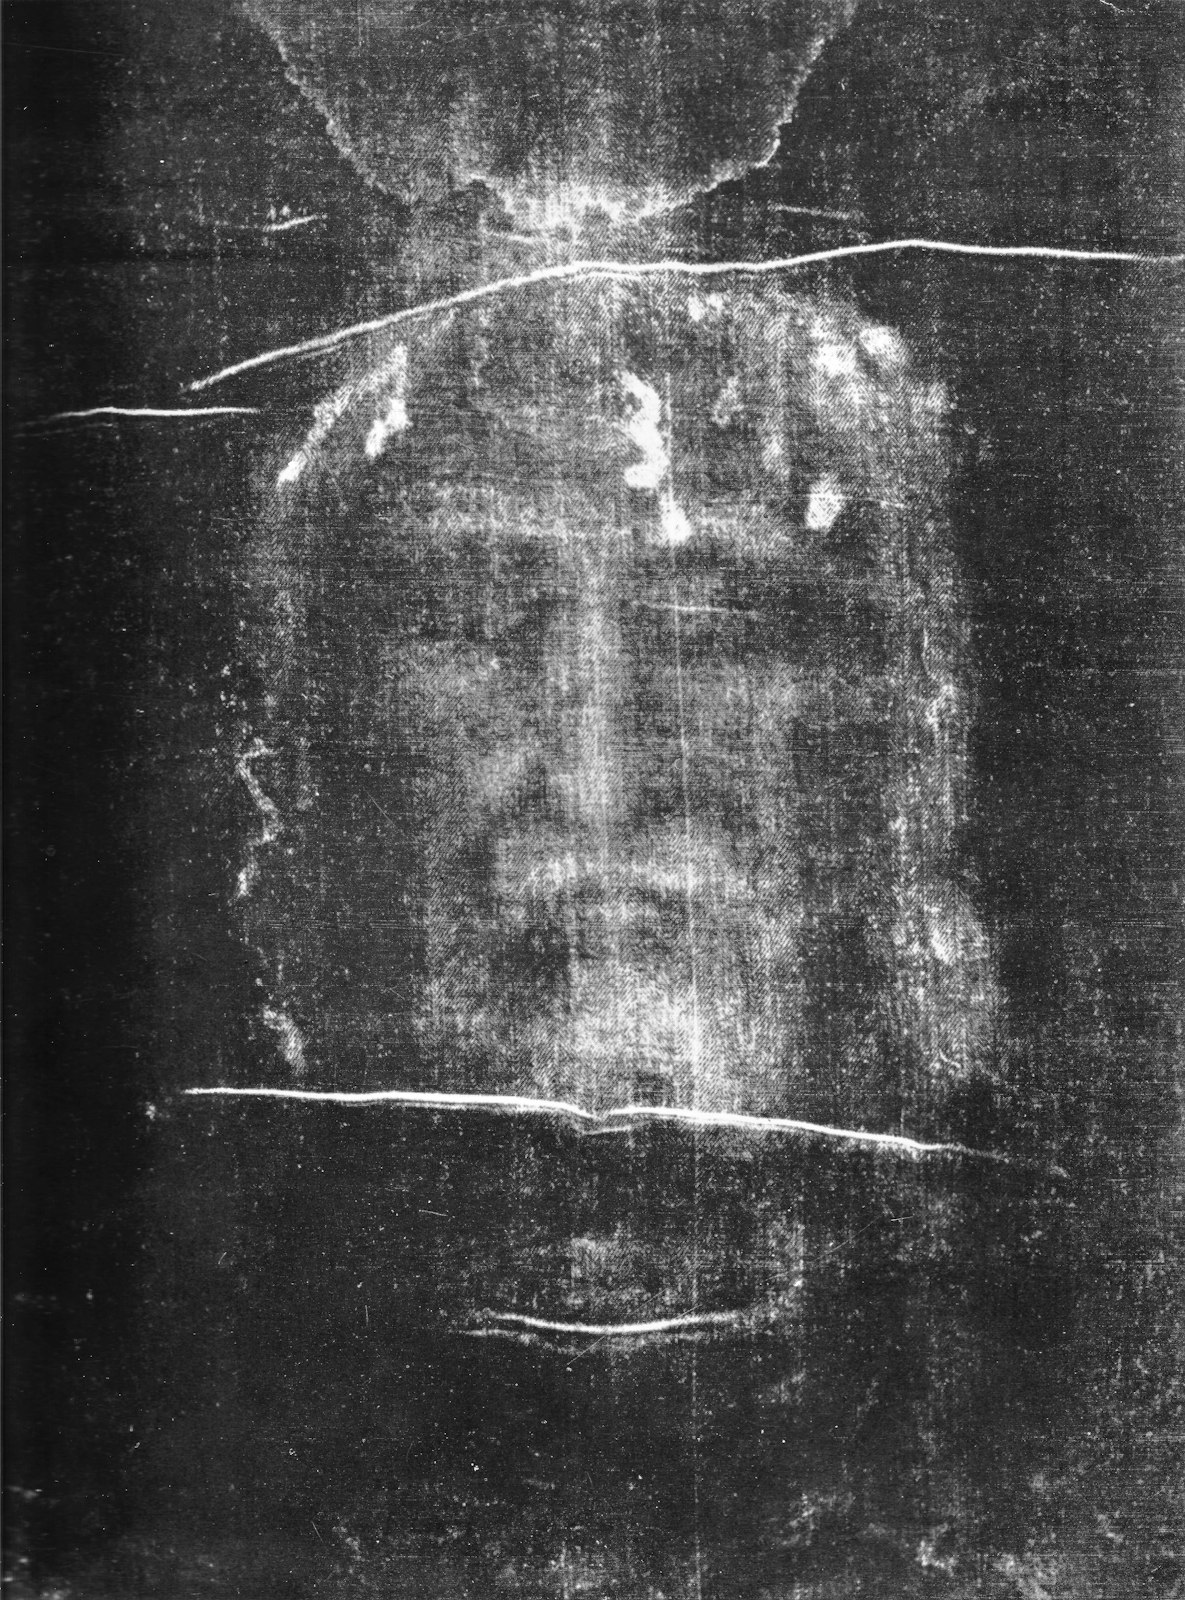 A negative image of the face of the man of the shroud, taken in 1898. (Picture courtesy of Deacon Bob Tremmel)